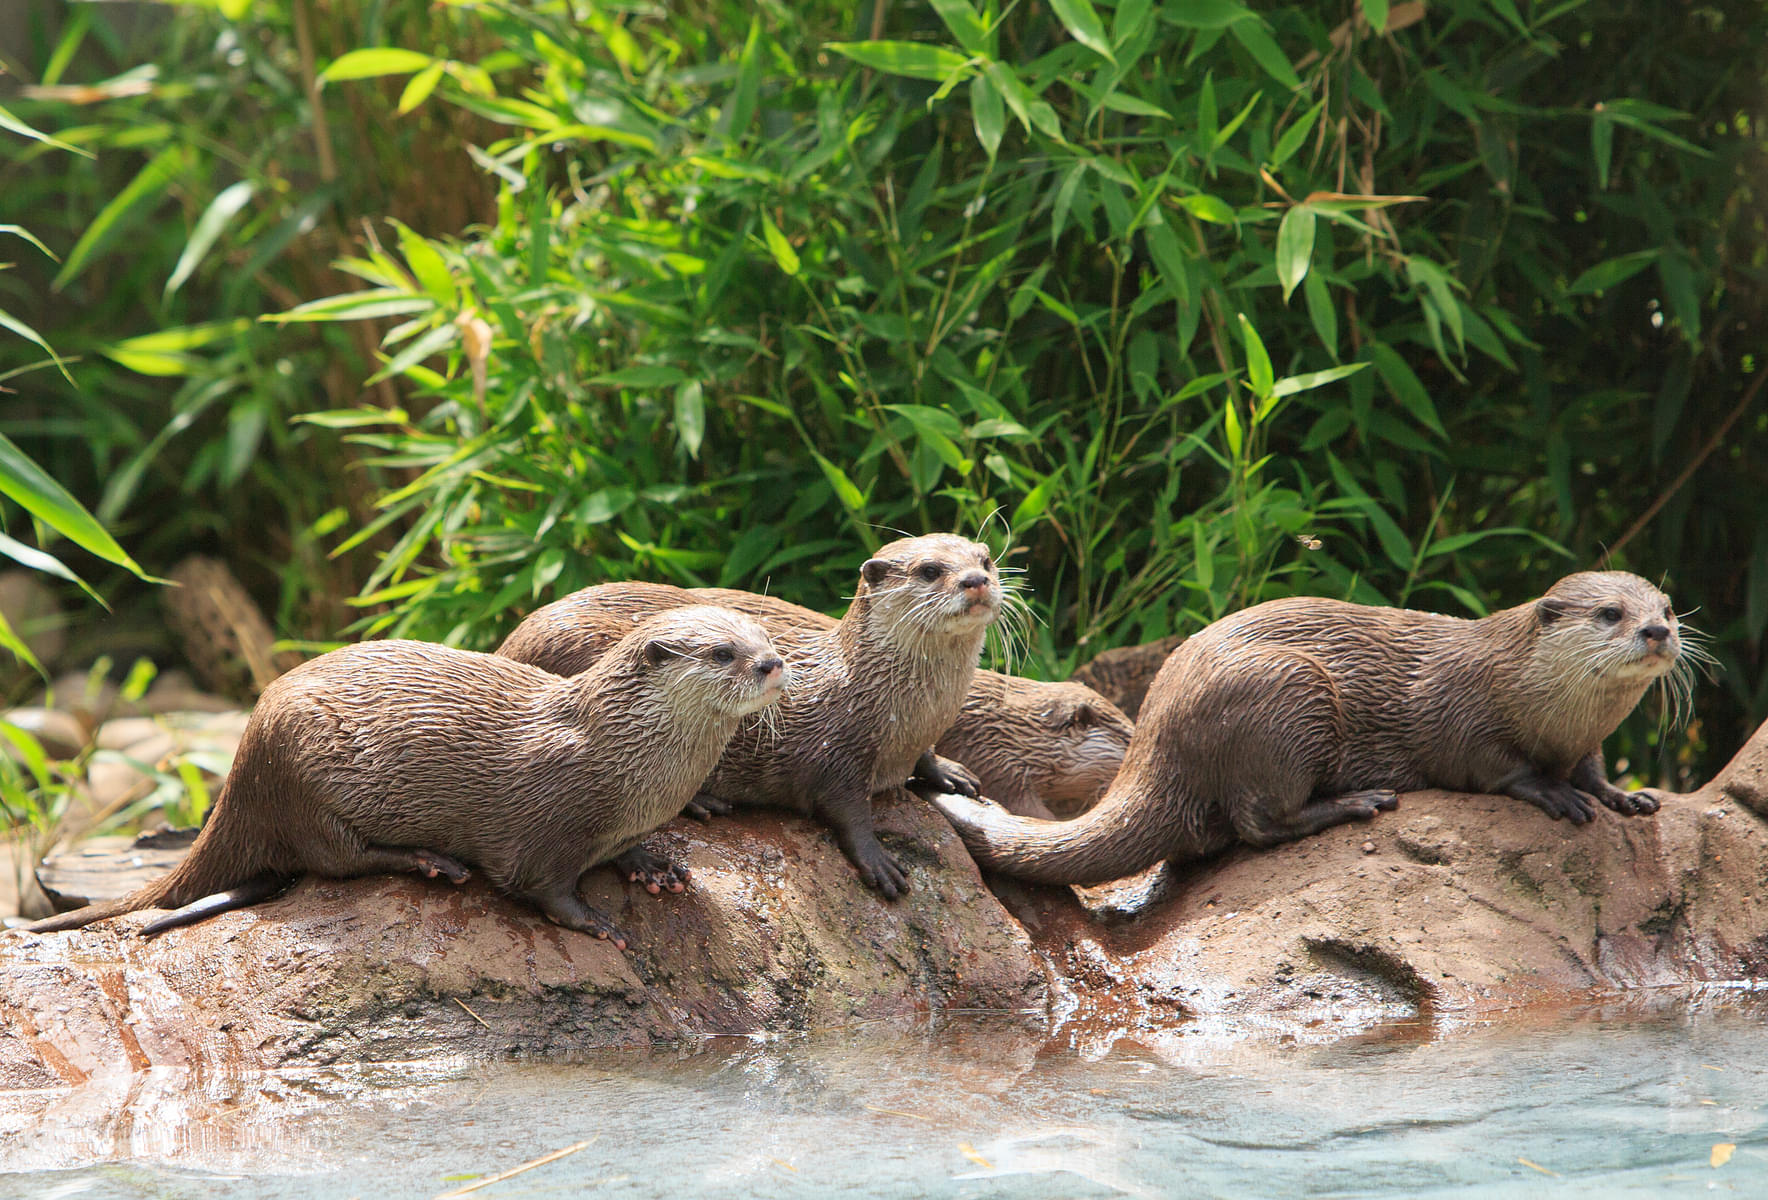 Witness the cuteness of the otters